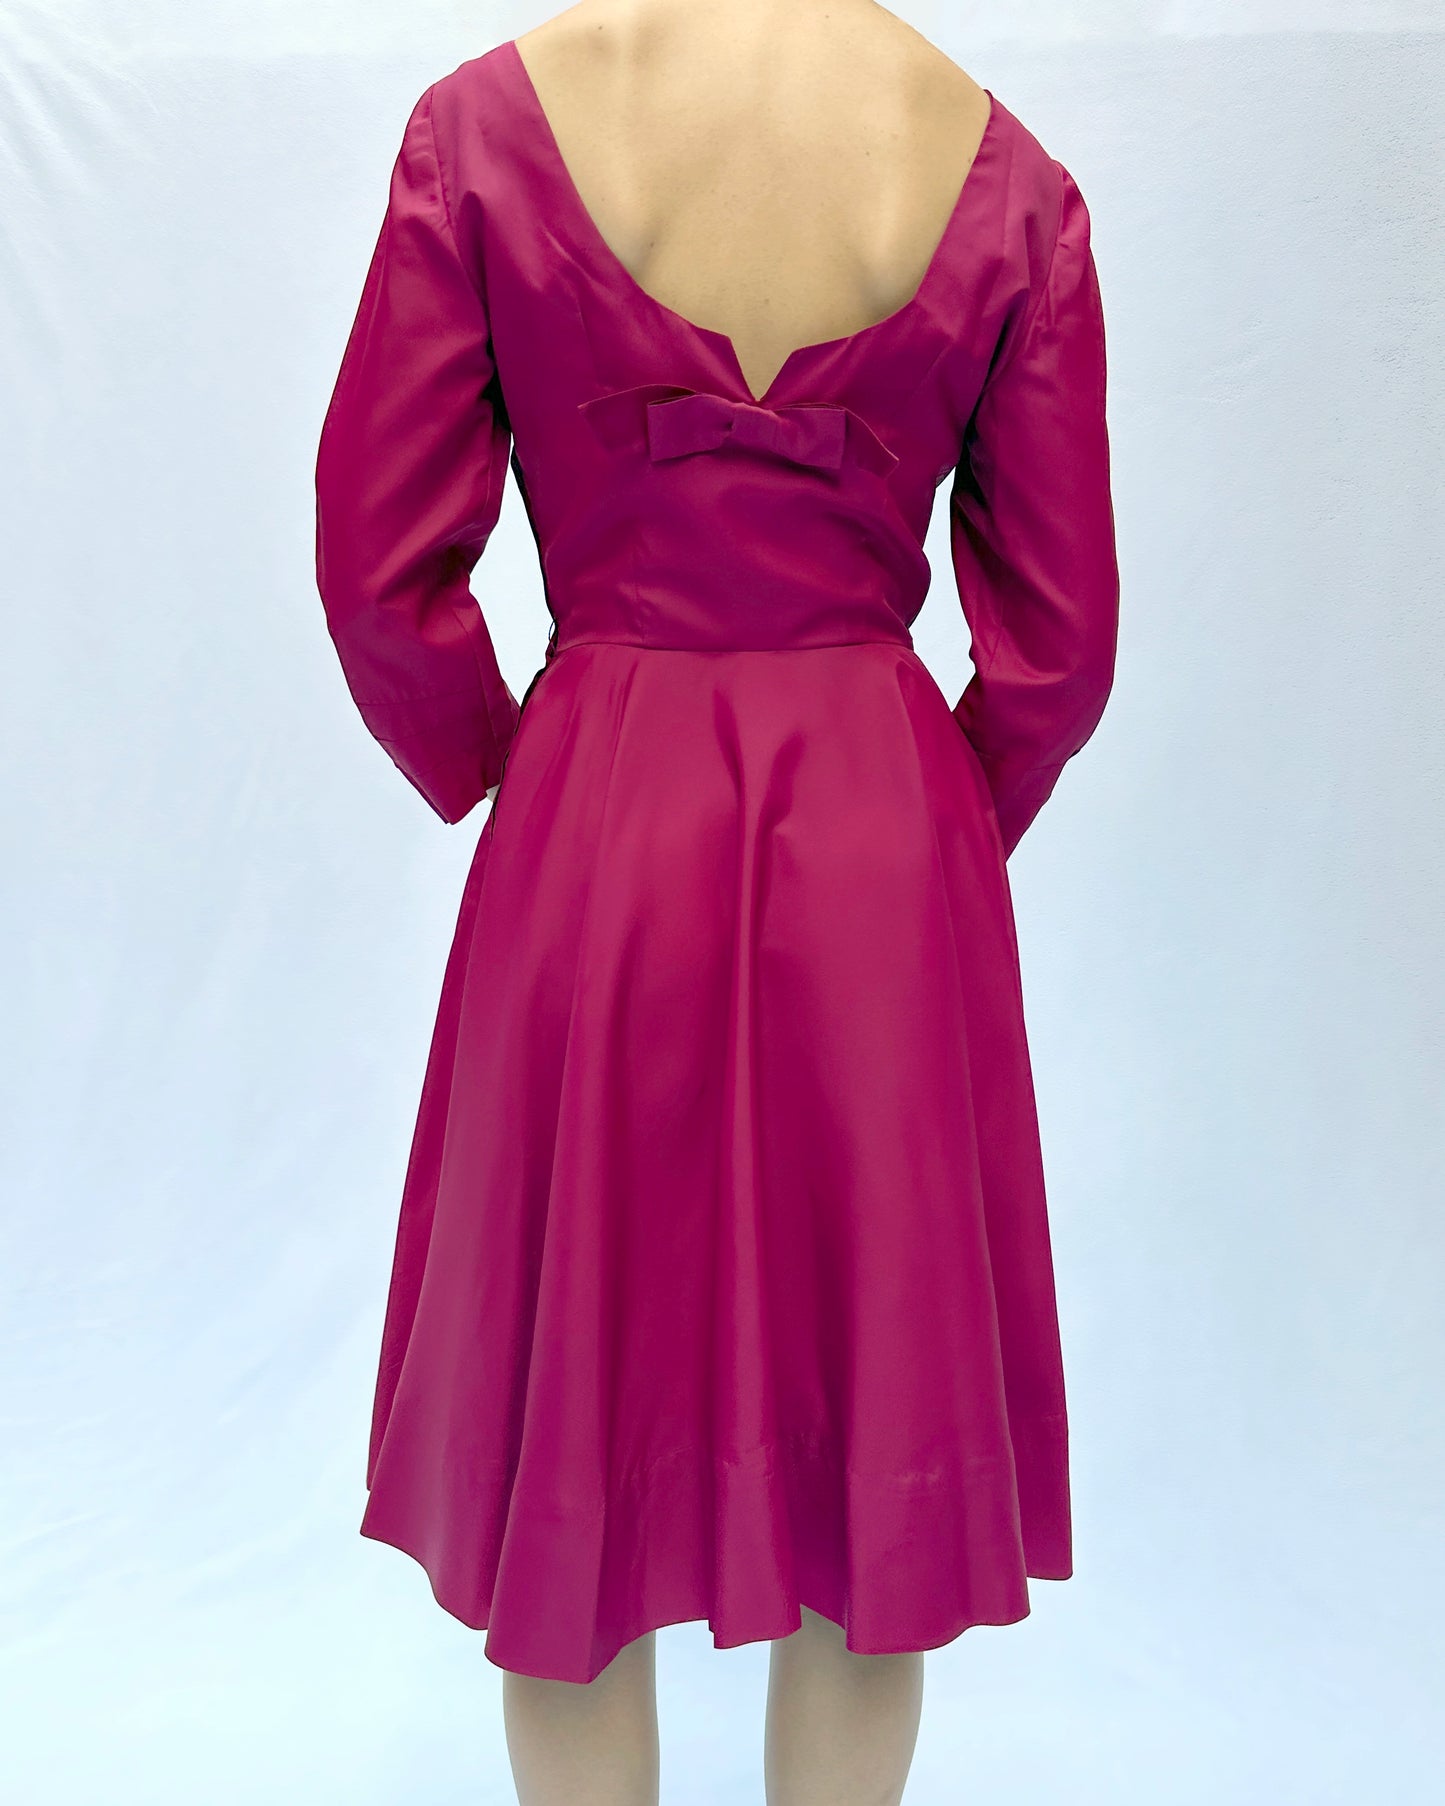 VINTAGE 1950s FIT AND FLARE DRESS